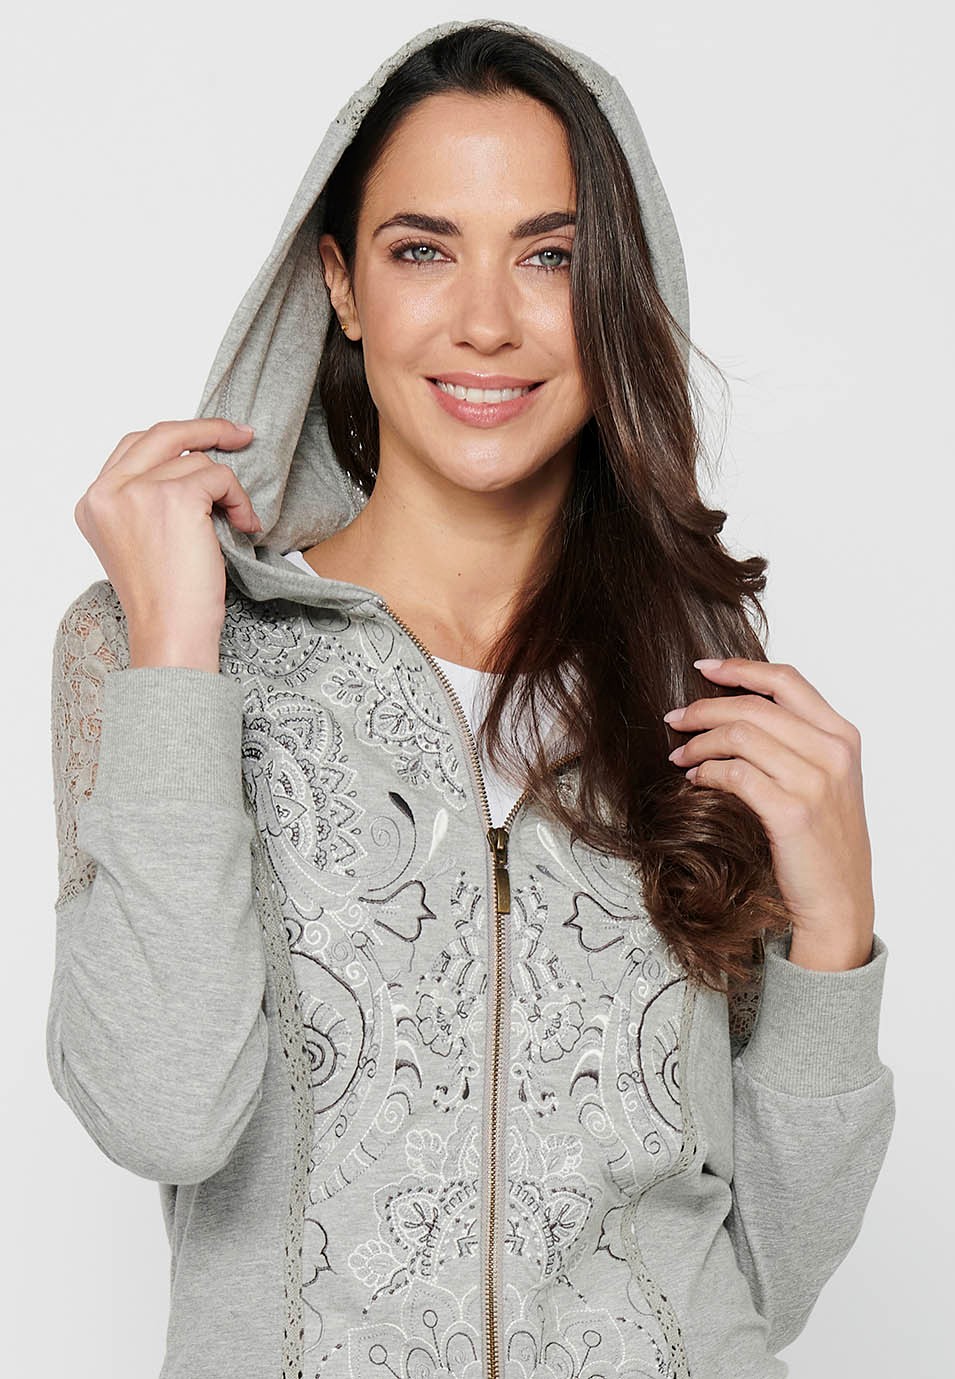 Sweatshirt jacket with zipper front closure and lace details with gray hooded collar for women 6